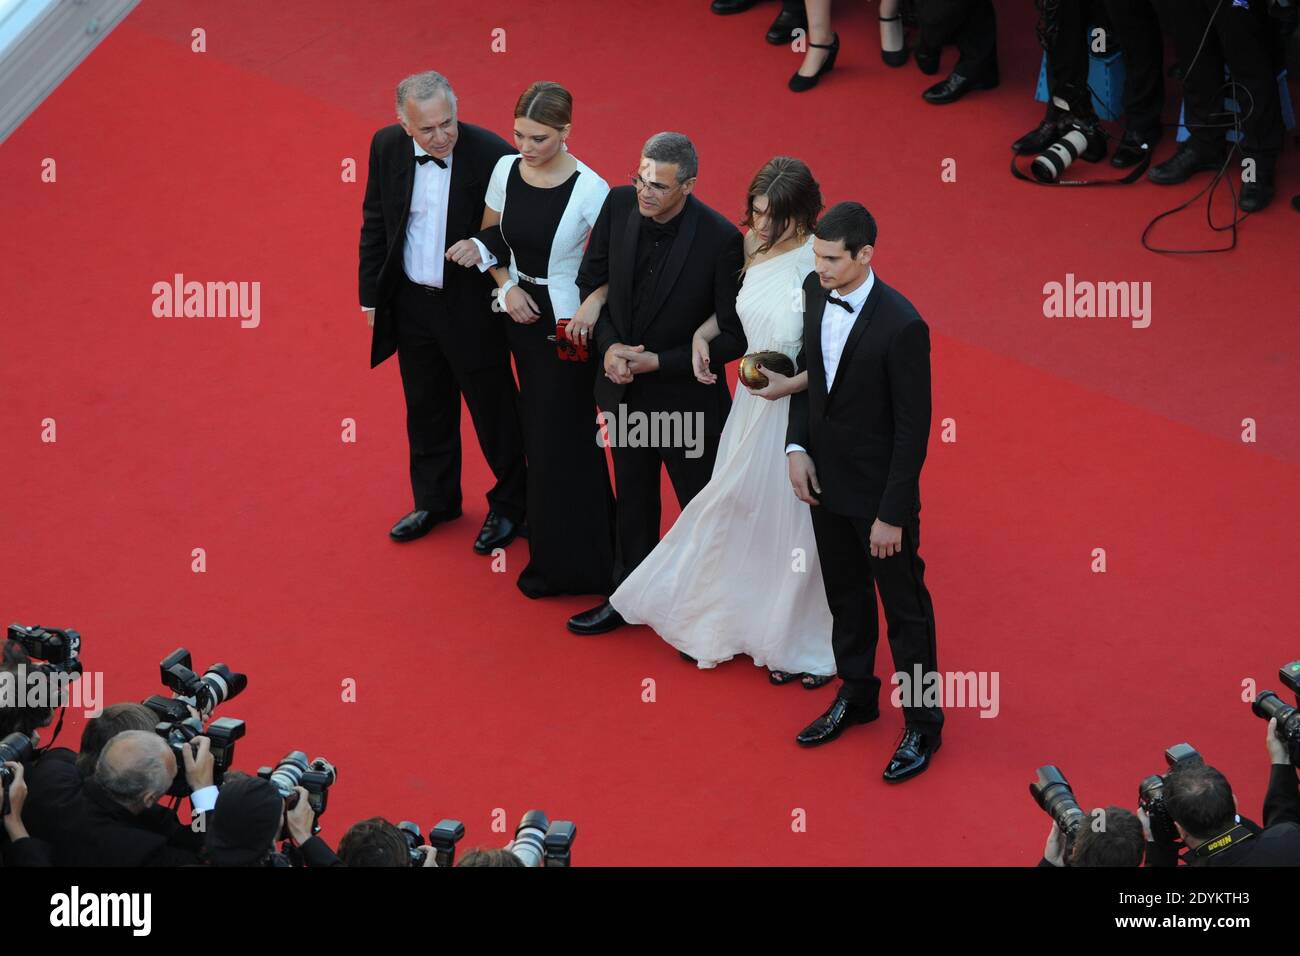 Producer Brahim Chioua, actress Lea Seydoux, director Abdellatif Kechiche, actors Adele Exarchopoulos and Jeremie Laheurte arriving for Zulu screening and closing ceremony held at the Palais des Festivals in Cannes, France on May 26, 2013, as part of the 66th Cannes Film Festival. Photo by Alban Wyters/ABACAPRESS.COM Stock Photo